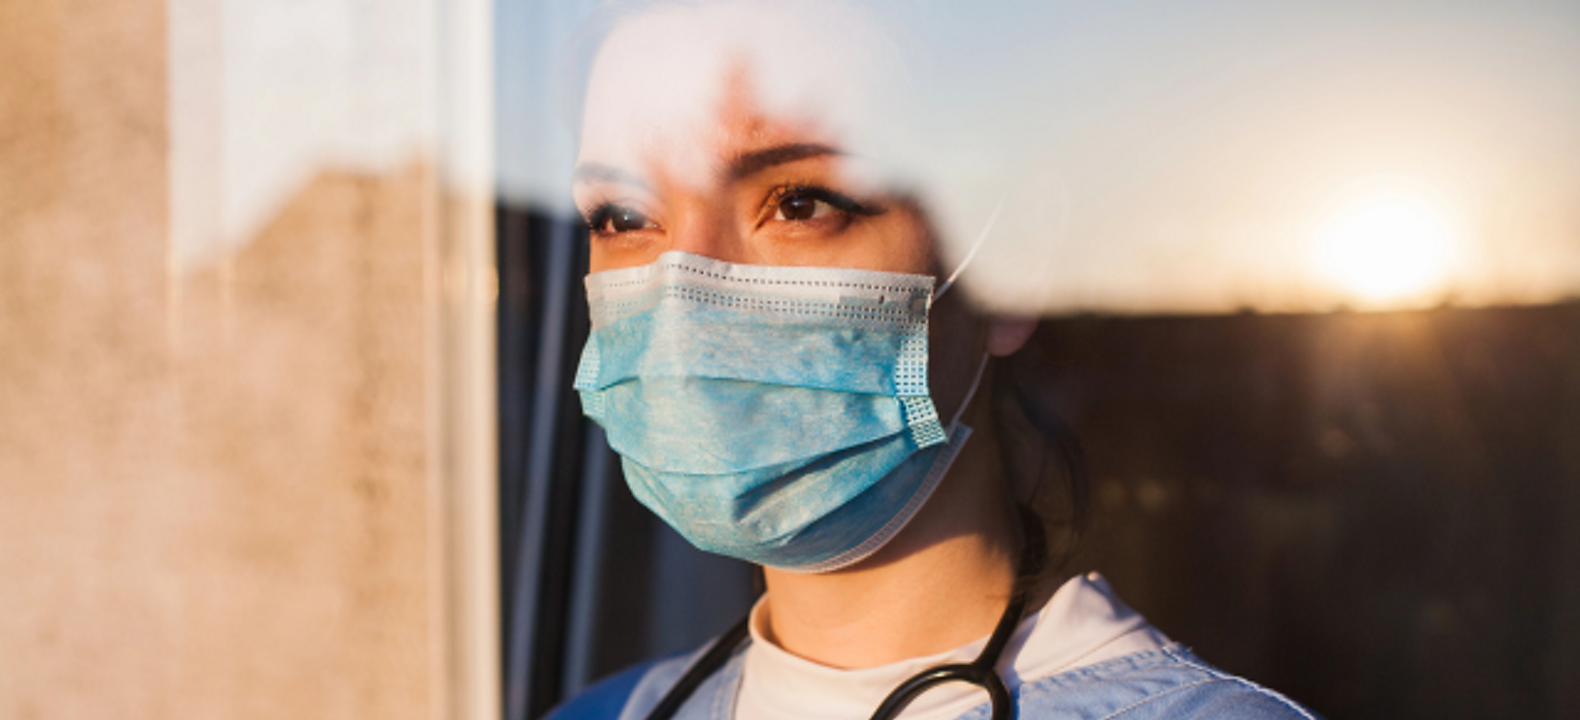 A masked medical professional gazes into the distance through a window.